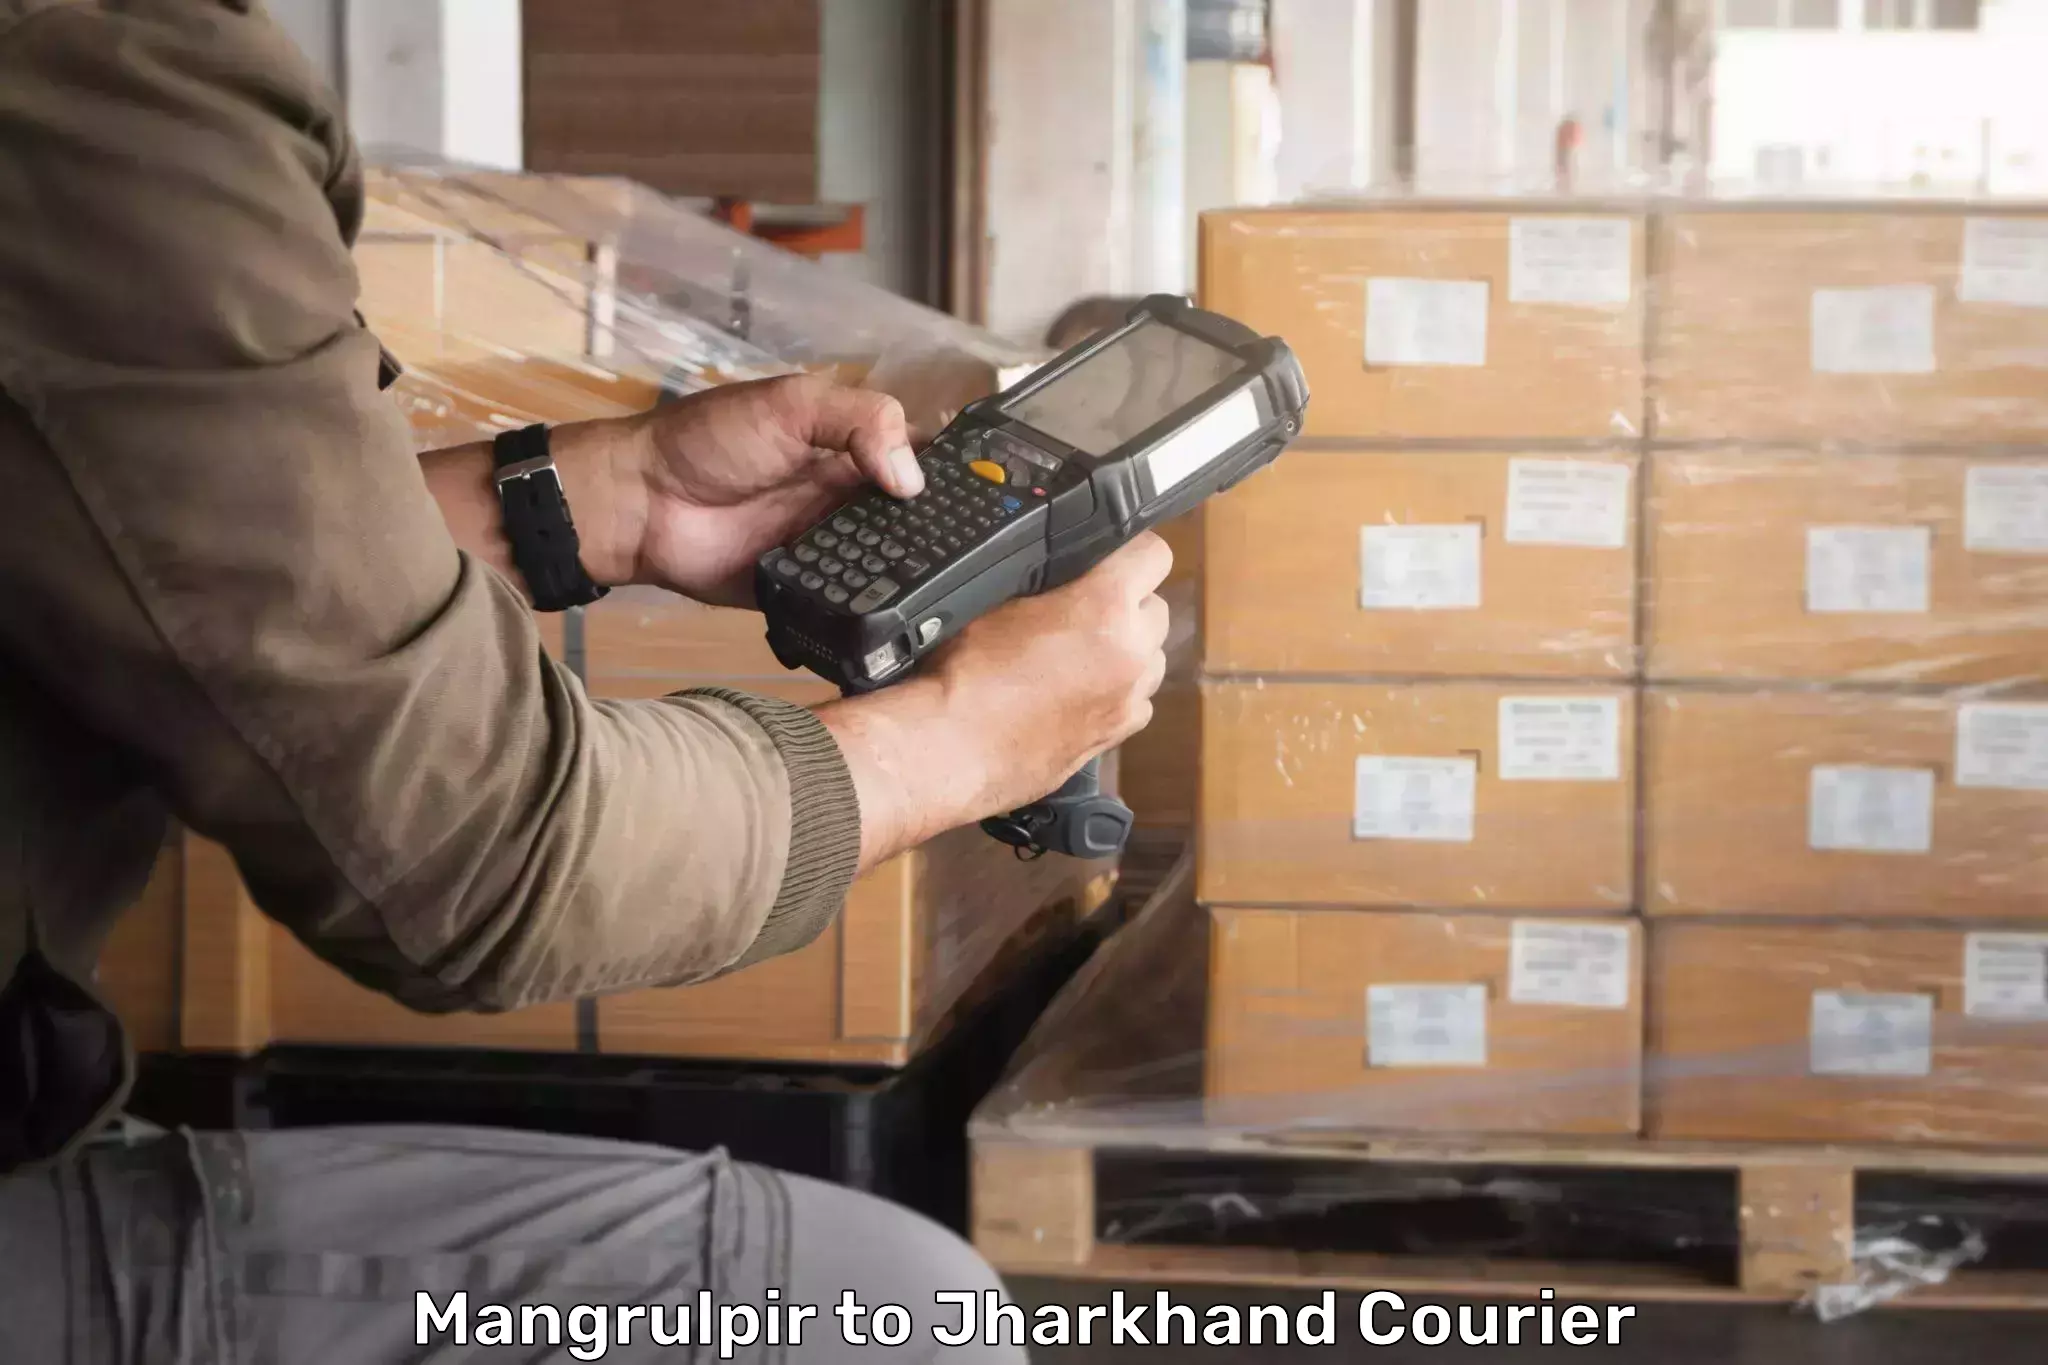 Reliable delivery network Mangrulpir to Dhanbad